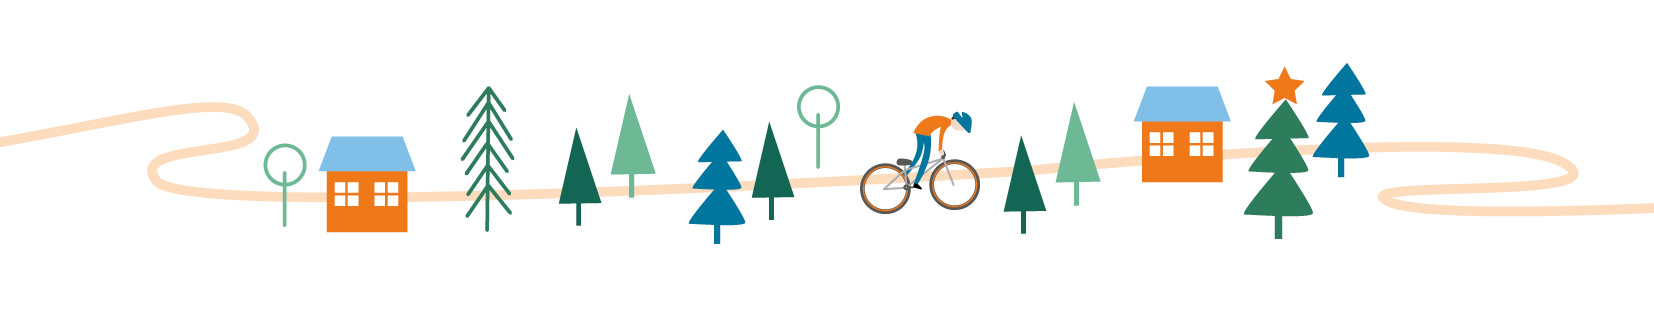 An illustration of a boy riding a bike past trees and houses